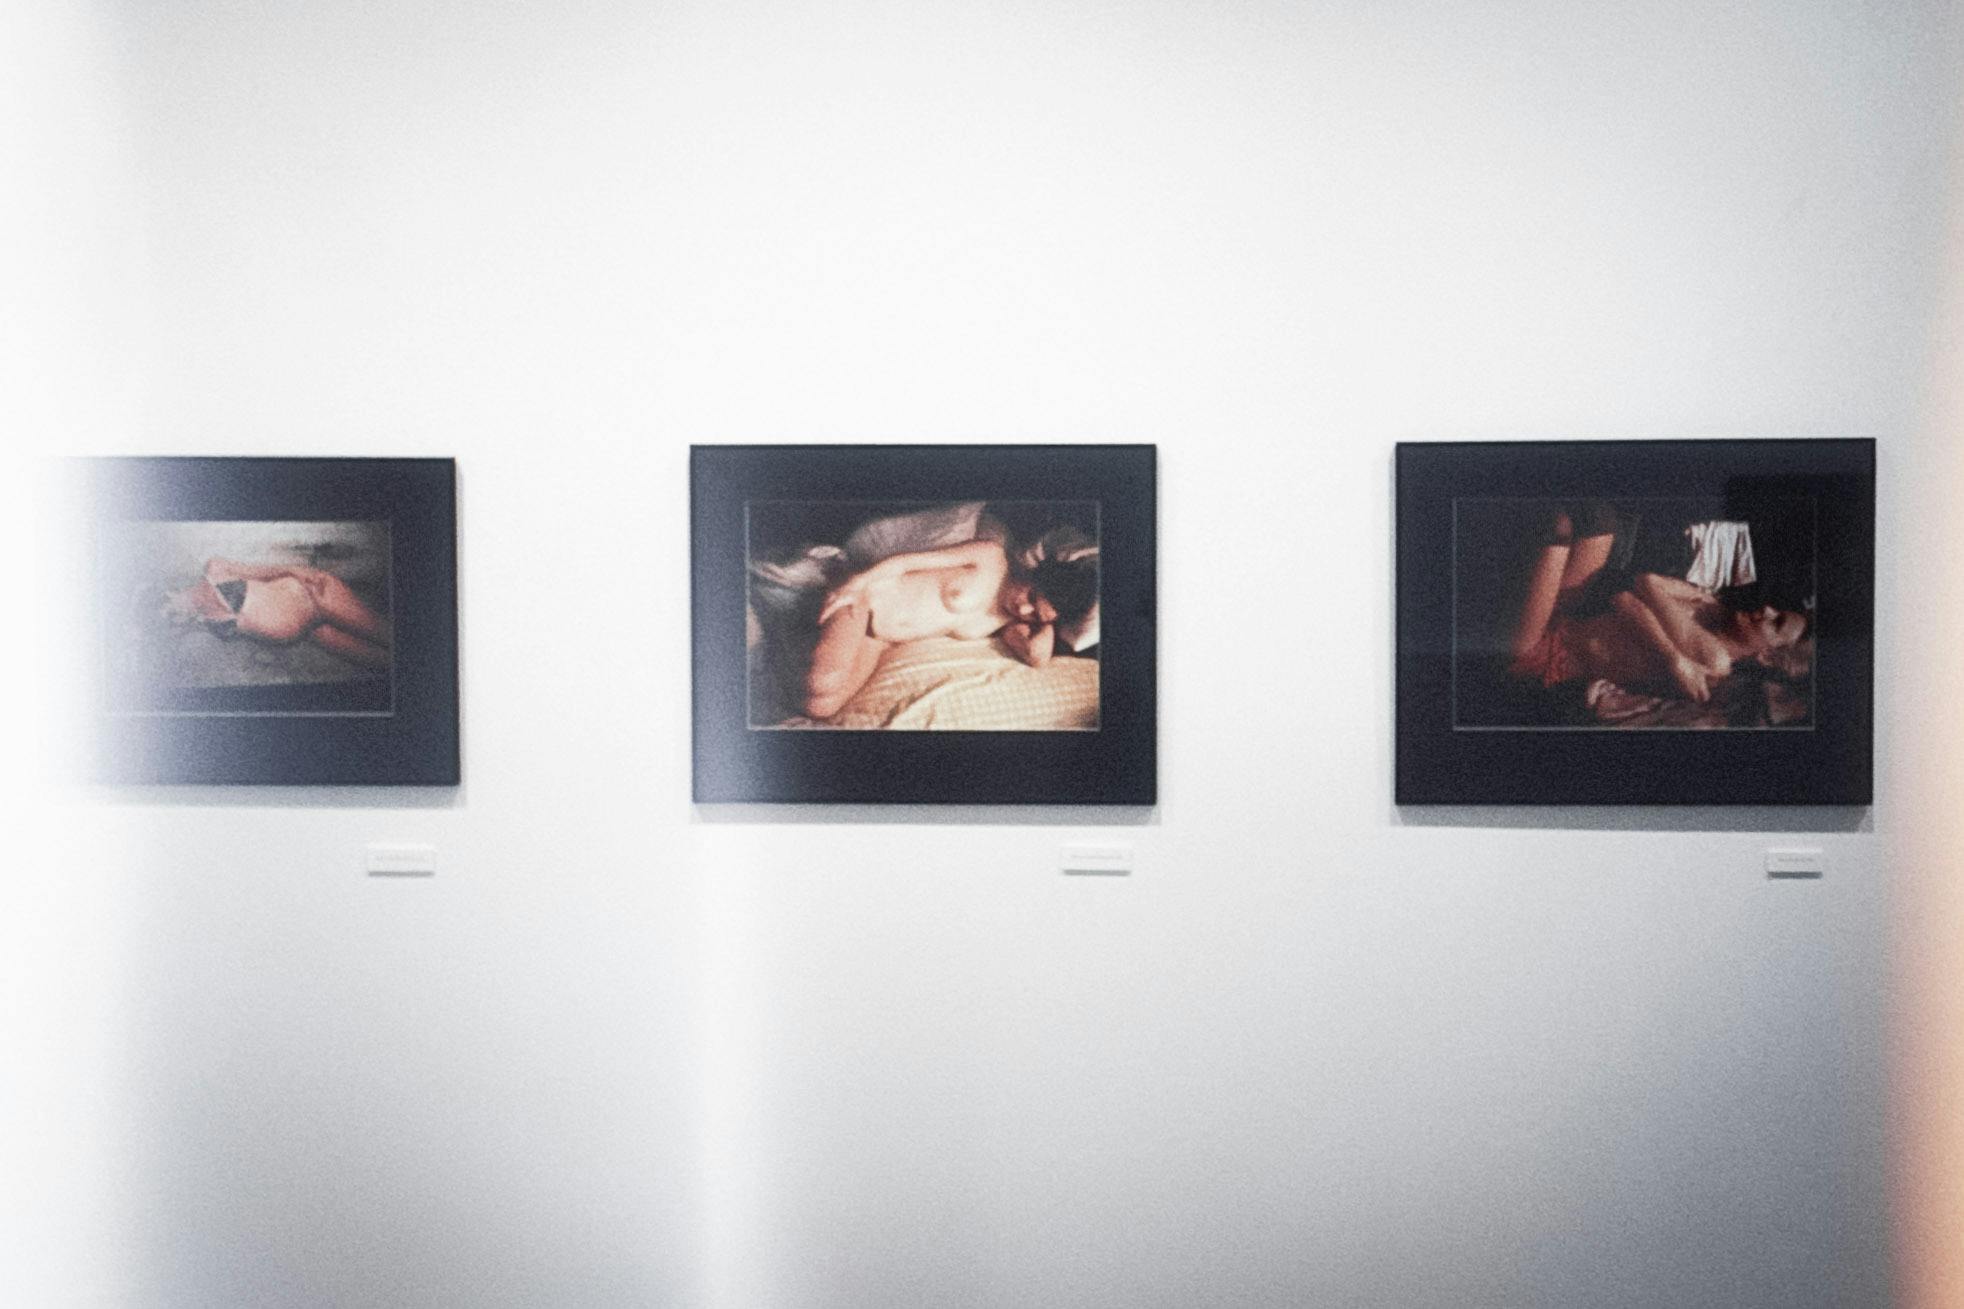 A closeup of three photos in black frames on a white wall. The photos all show people laying down in different stages of nudity. One person is pregnant, one is in bed, and one is sunbathing in shorts.